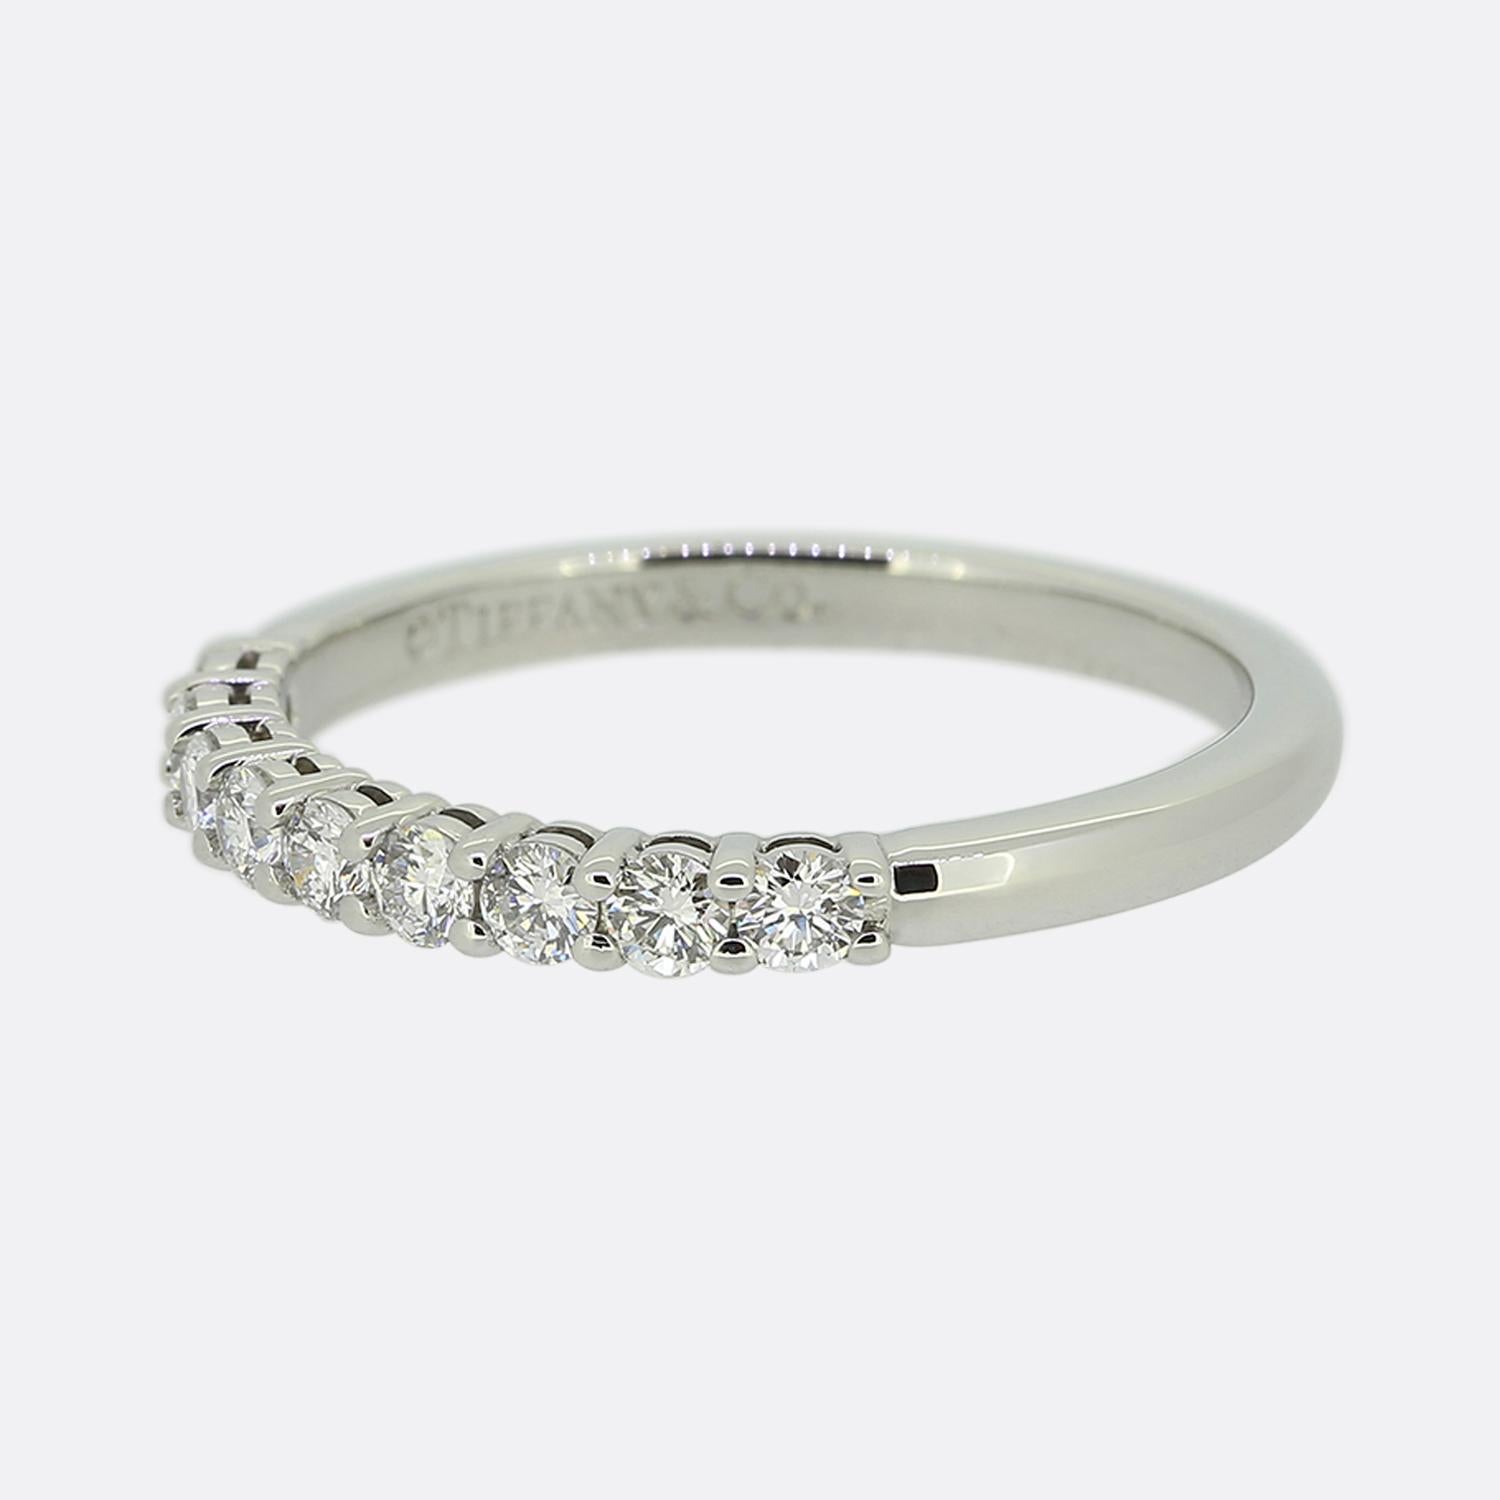 Here we have a wonderful nine-stone diamond ring from the world renowned jewellery designer, Tiffany & Co. This piece has been crafted from platinum and features a half circle of perfectly matched round brilliant cut diamonds in a single line